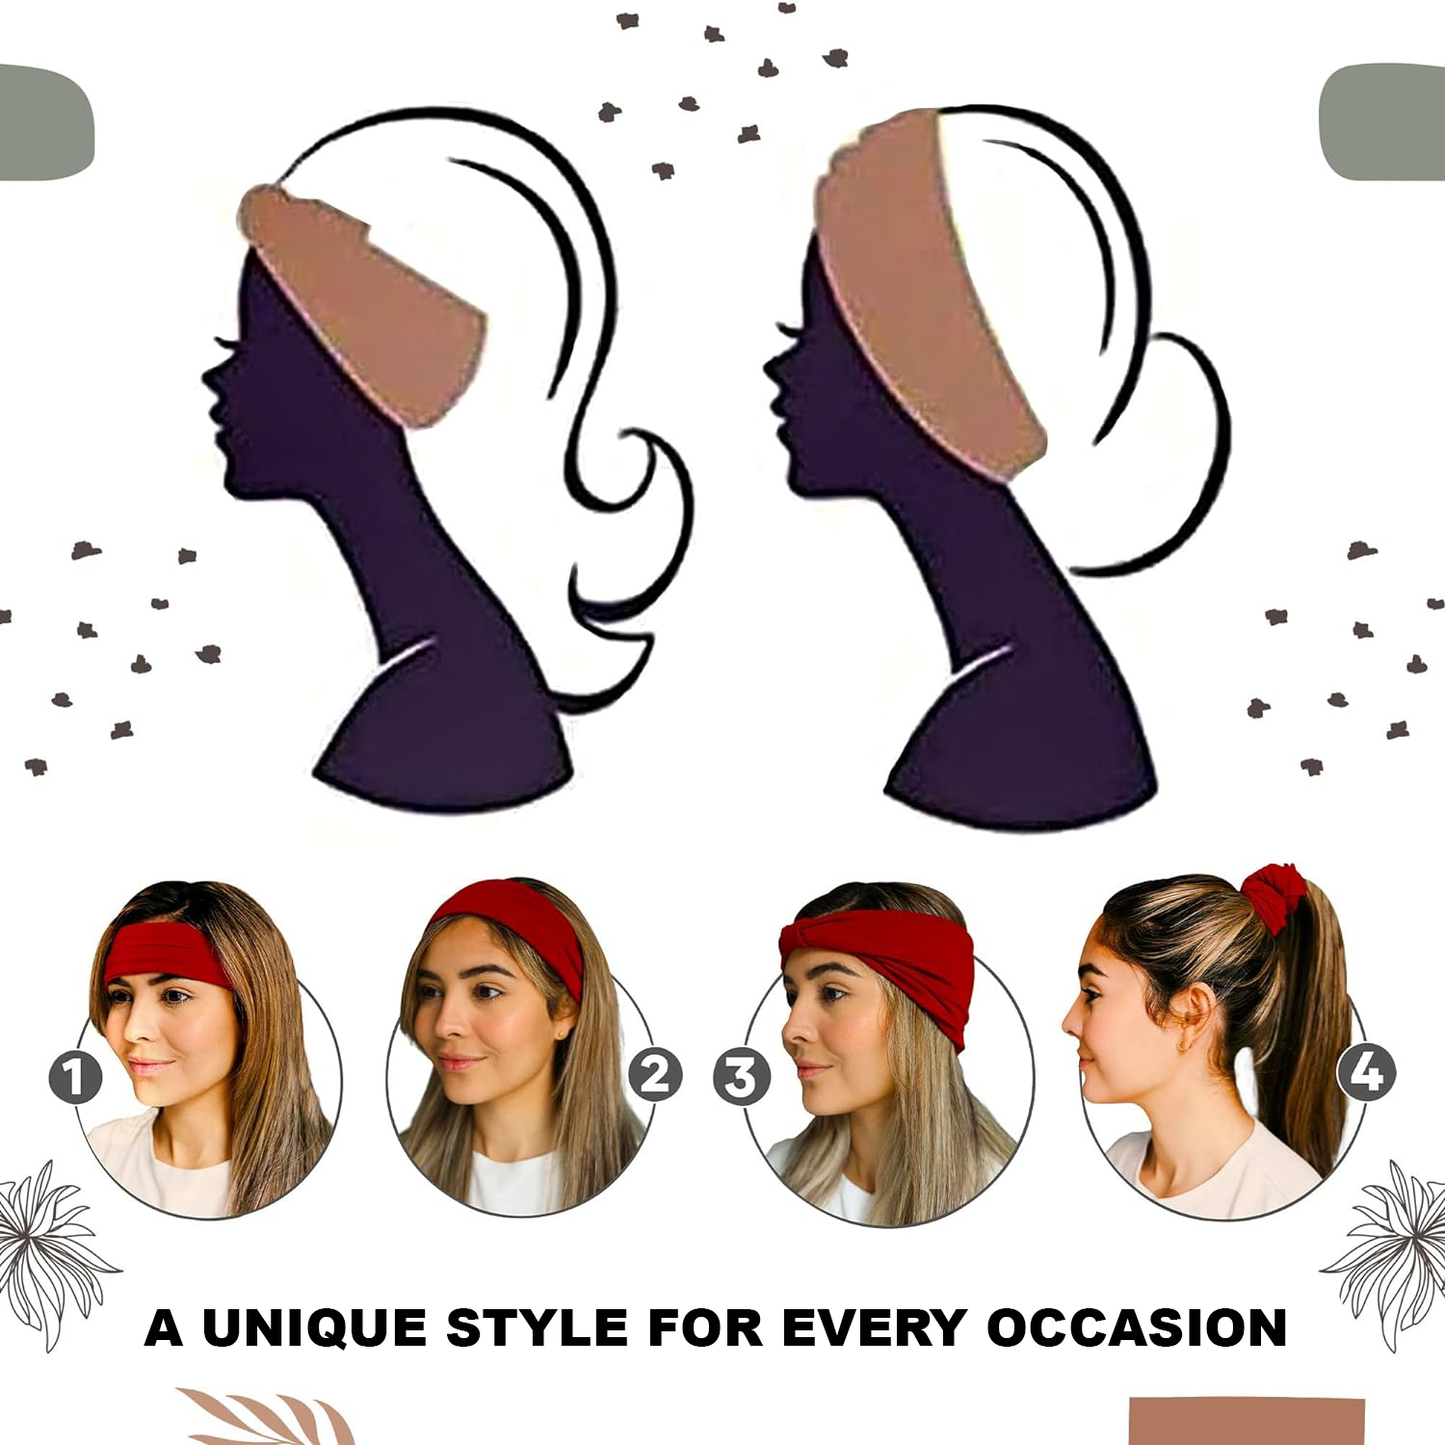 Overcare 6-Pack Wide Headbands & Turbans - Stylish Accessories for Women overcare